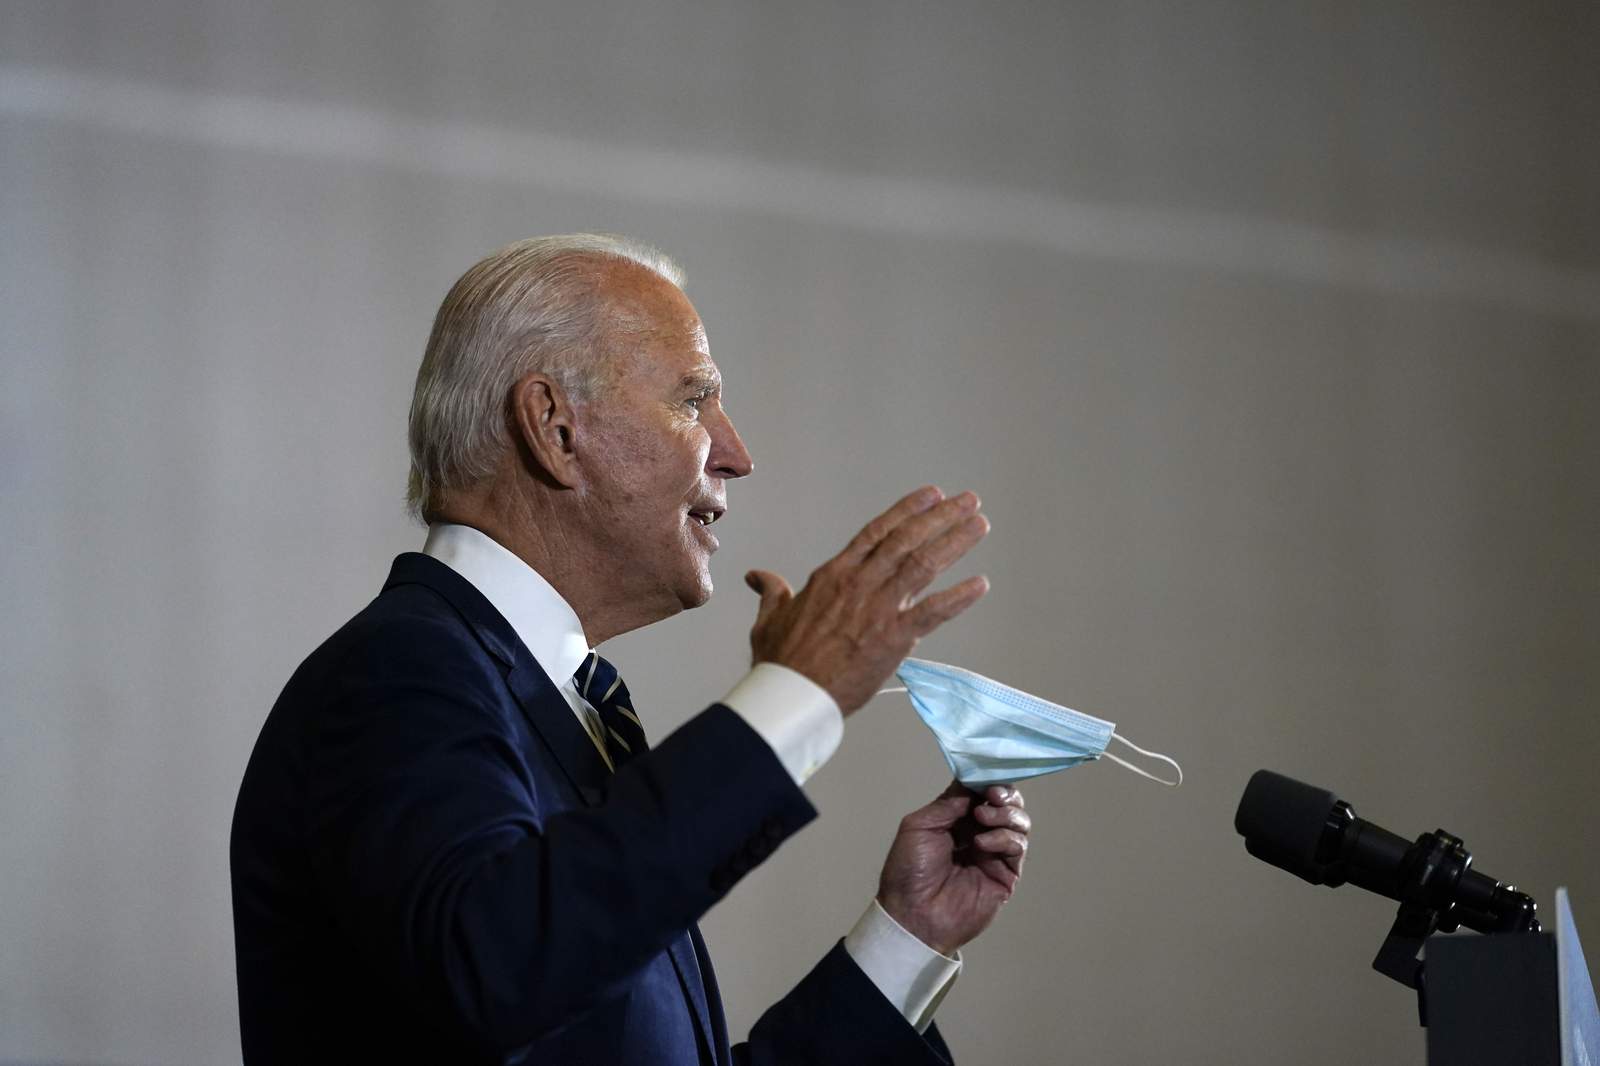 Biden outraises Trump $383M to $248M in September